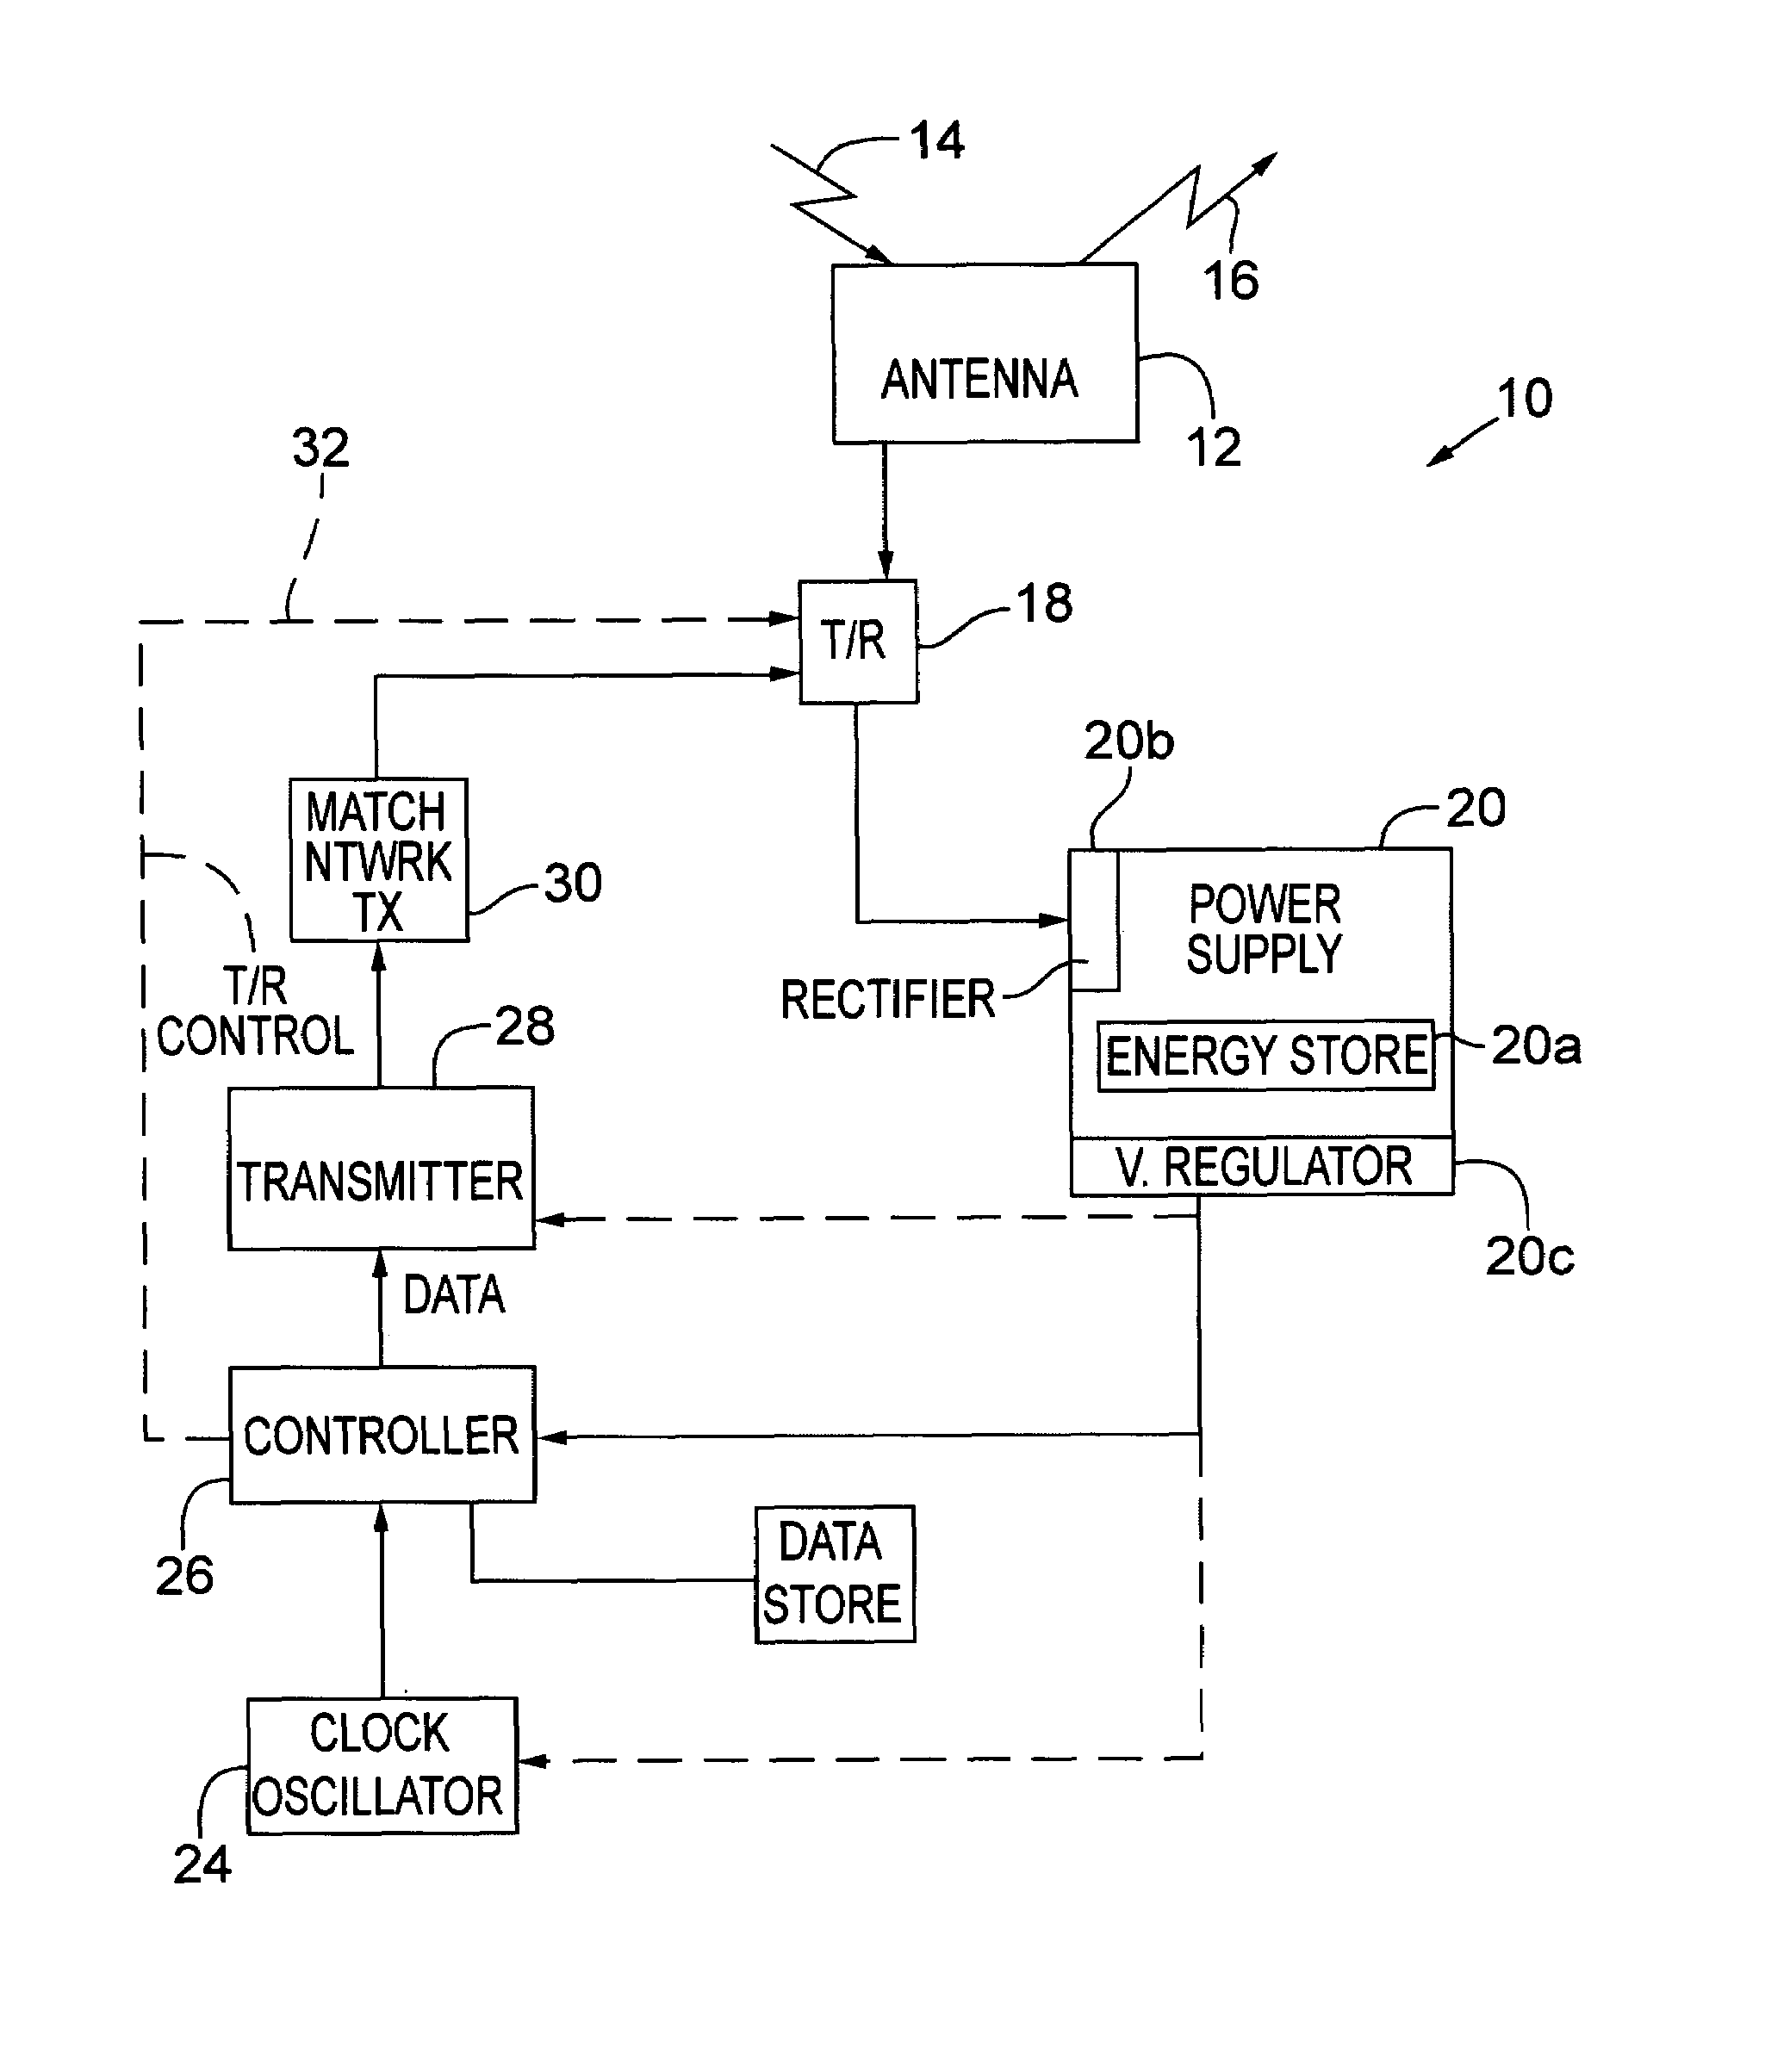 Product identification tag device and reader